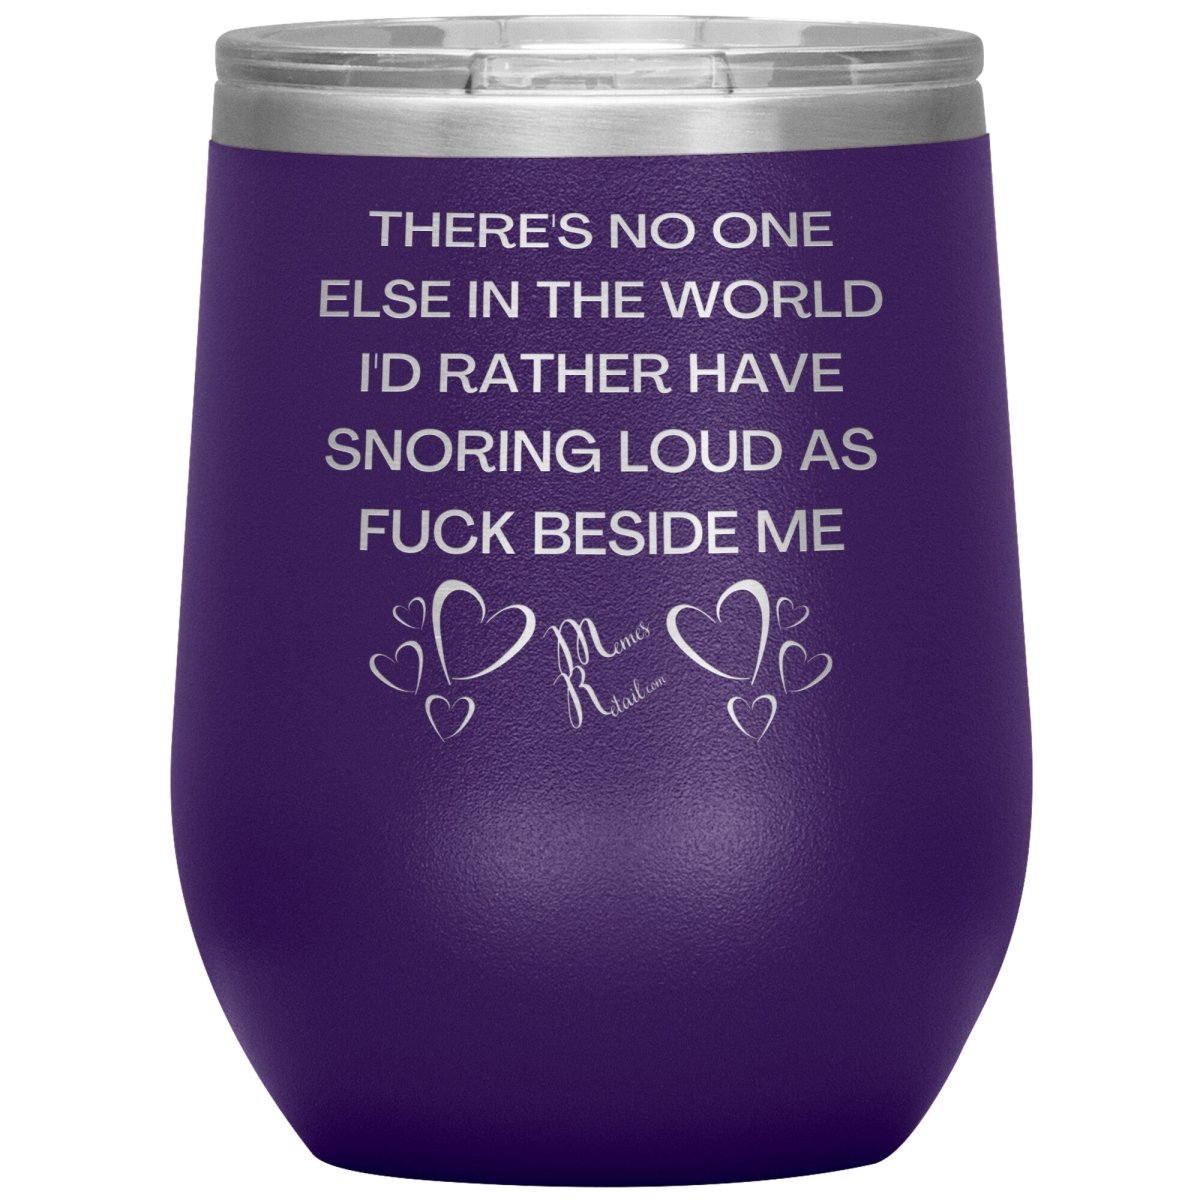 There's No One Else in the World I'd Rather Have Snoring Loud, 12oz Wine Insulated Tumbler / Purple - MemesRetail.com